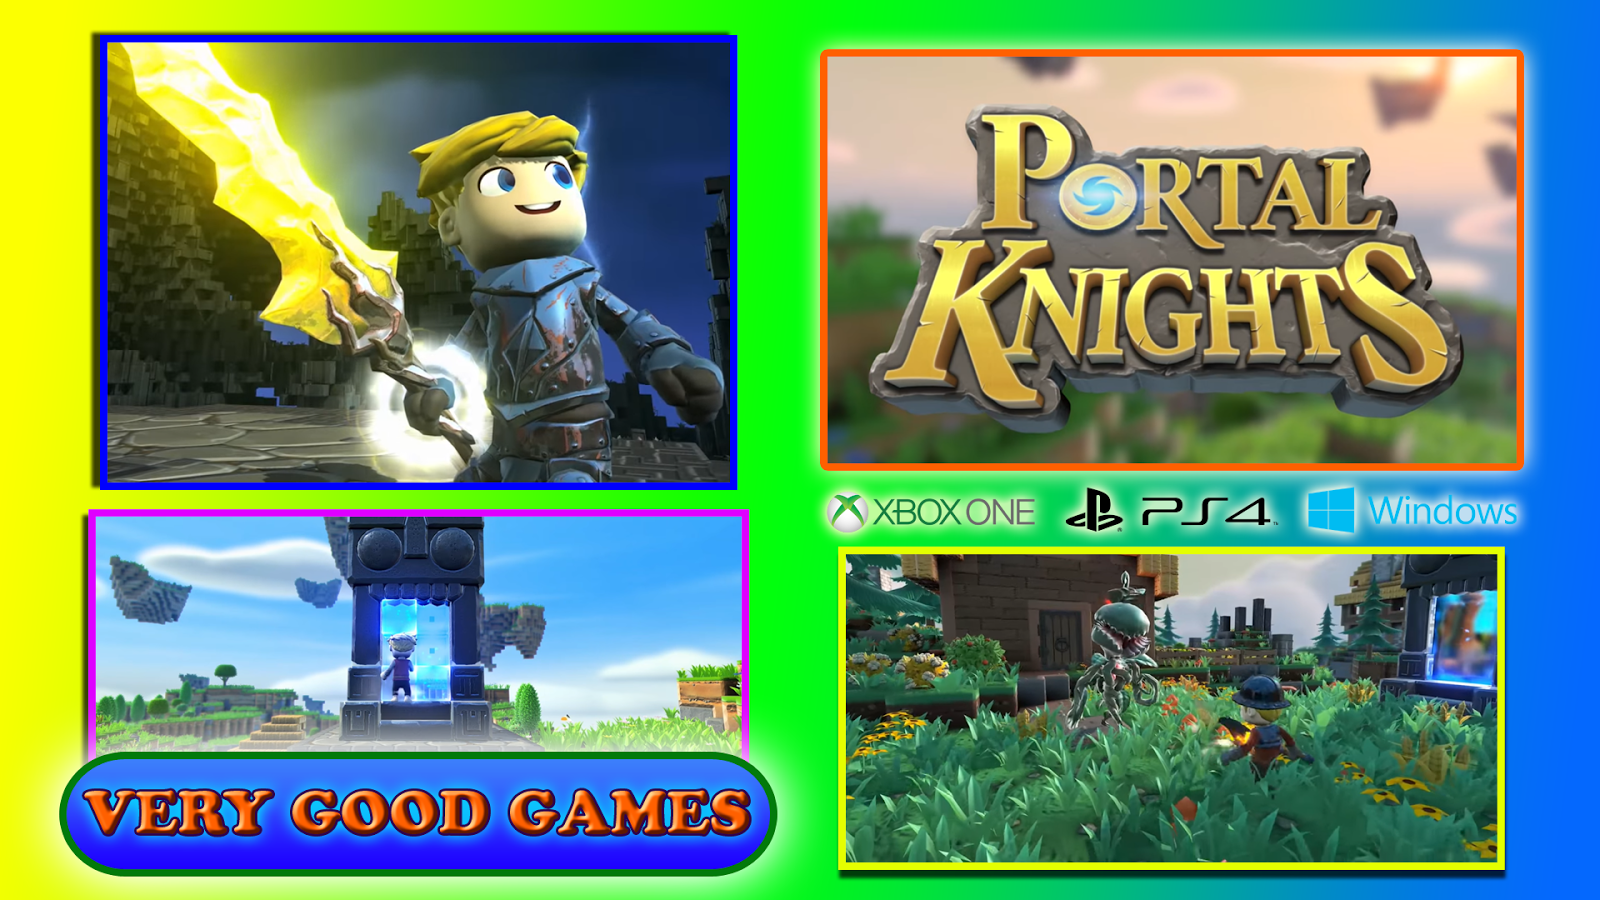 A banner with screenshots from the Portal Knights game - for PS4 and Xbox One game consoles, for Windows computers